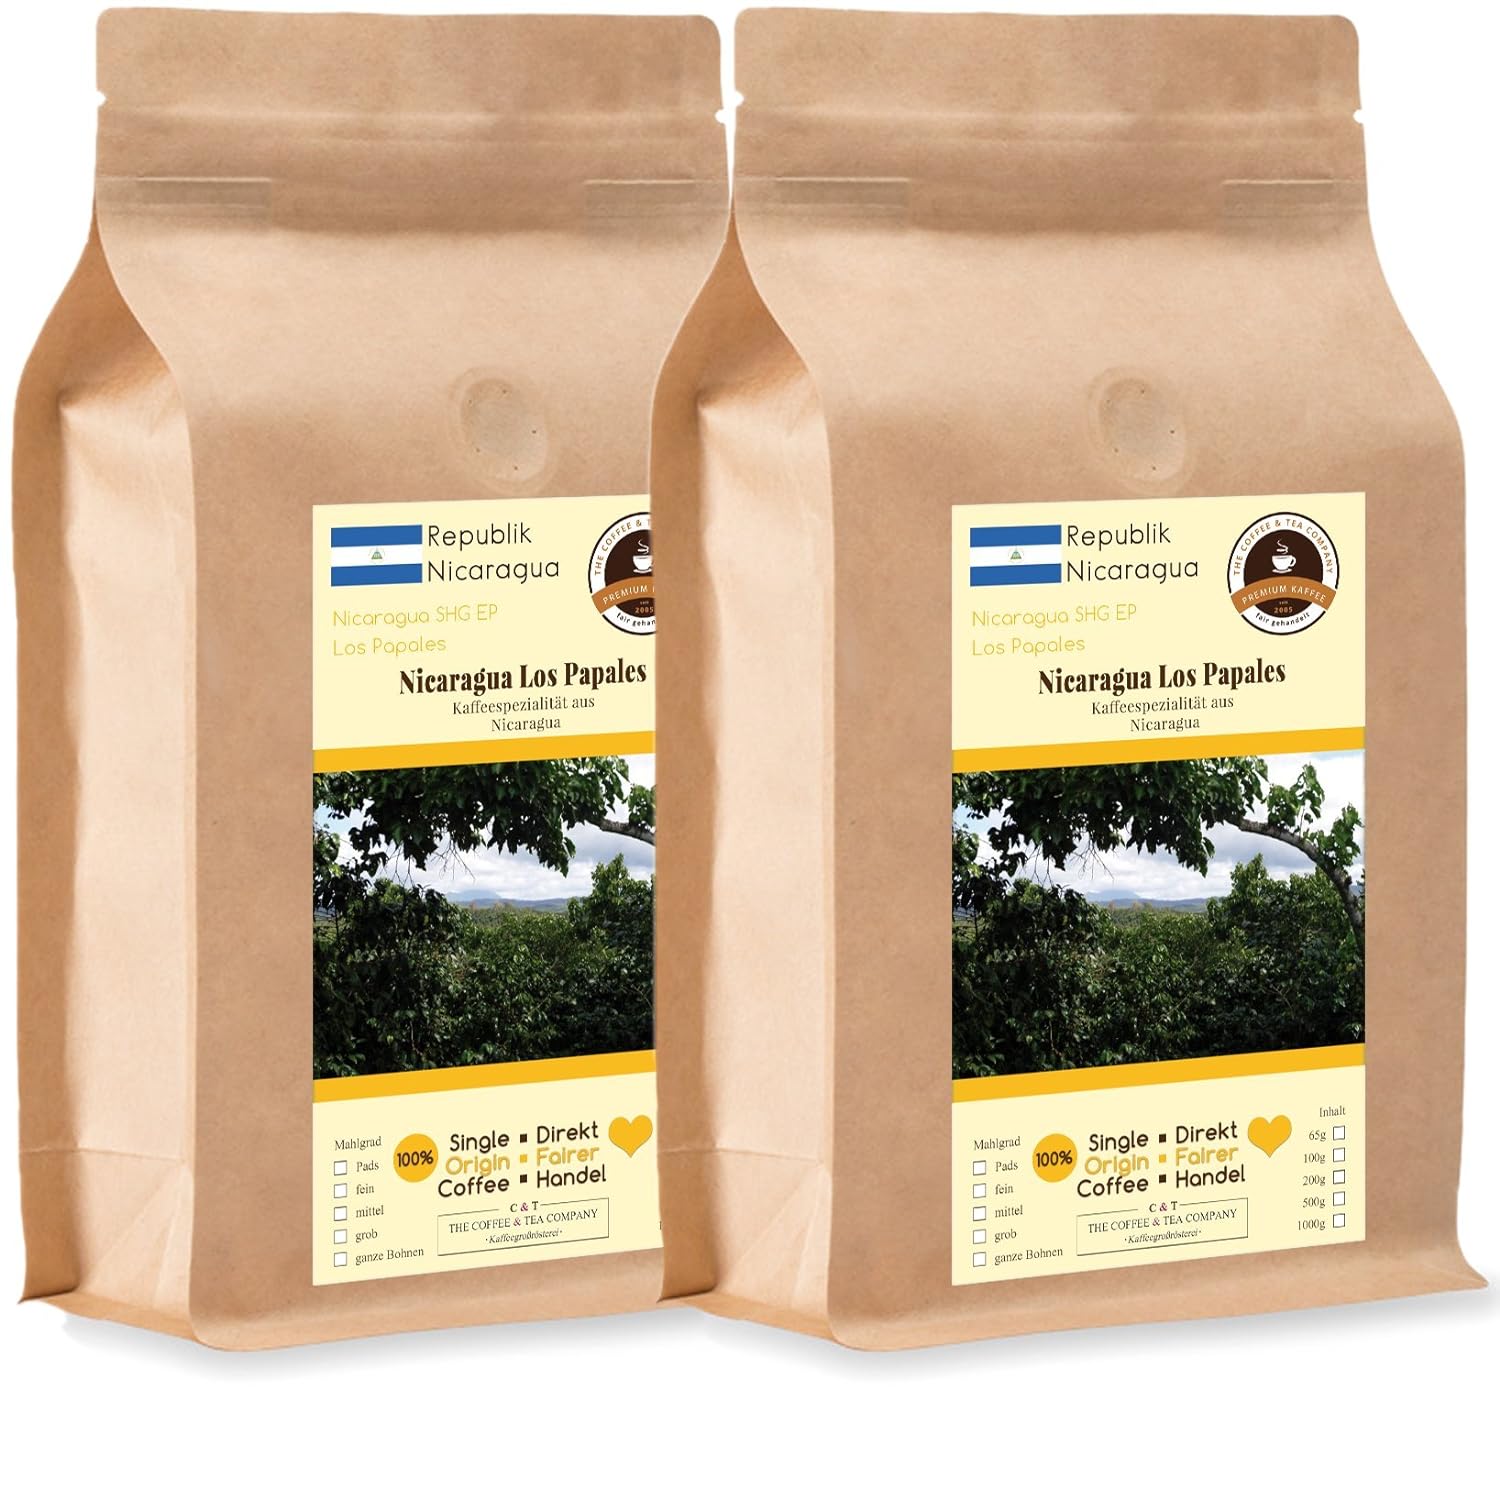 Coffee Globetrotter - Coffee with Heart - Nicaragua Los Papales - 2 x 1000 g Medium Ground - for Fully Automatic Coffee Grinder - Roasted Coffee Fair Trade | Refill Pack Economy Pack